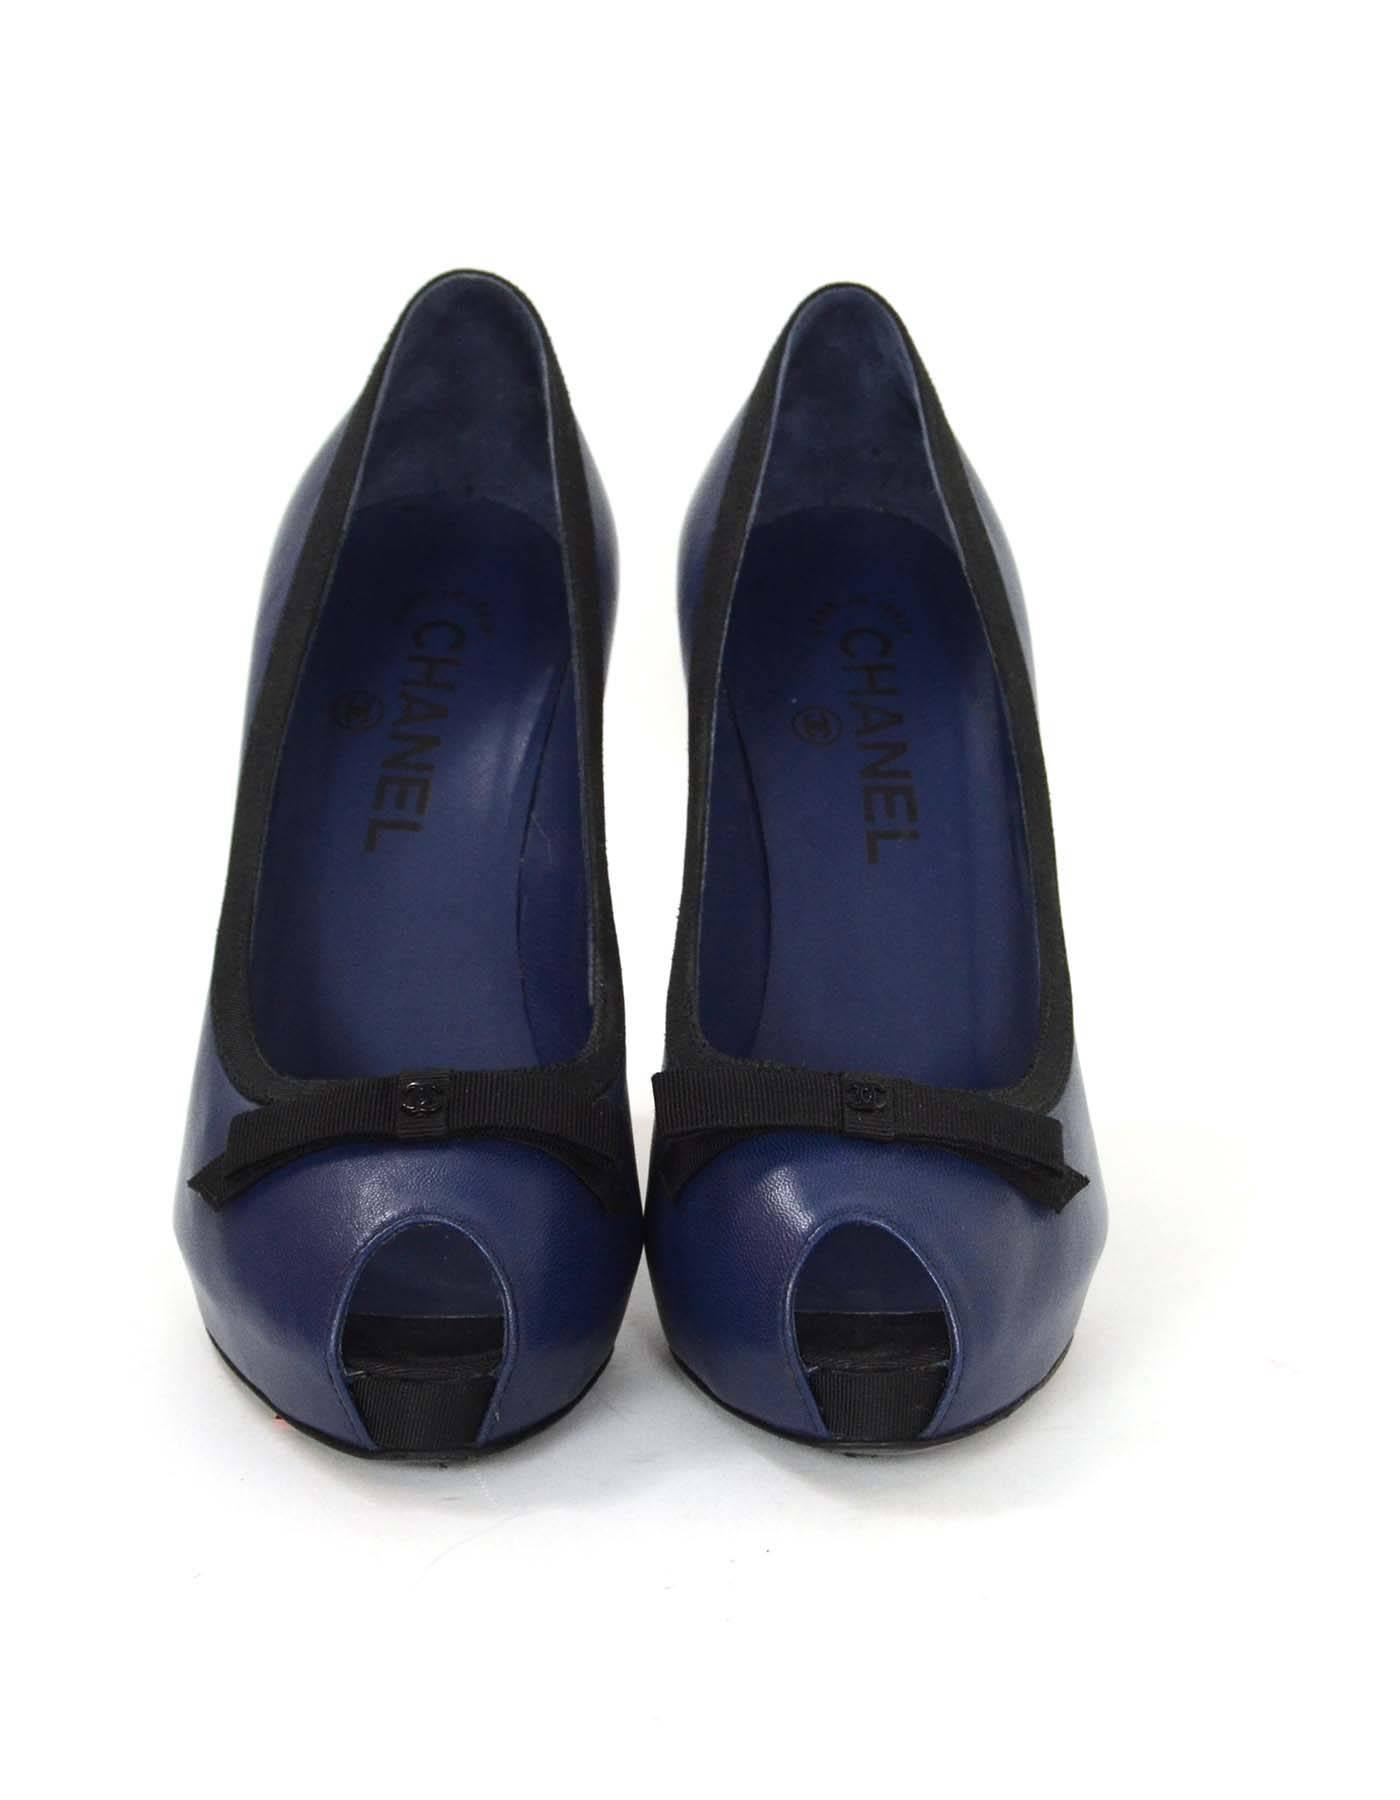 Chanel Navy & Black Bow Peep Toe Pumps sz 36.5 In Excellent Condition In New York, NY